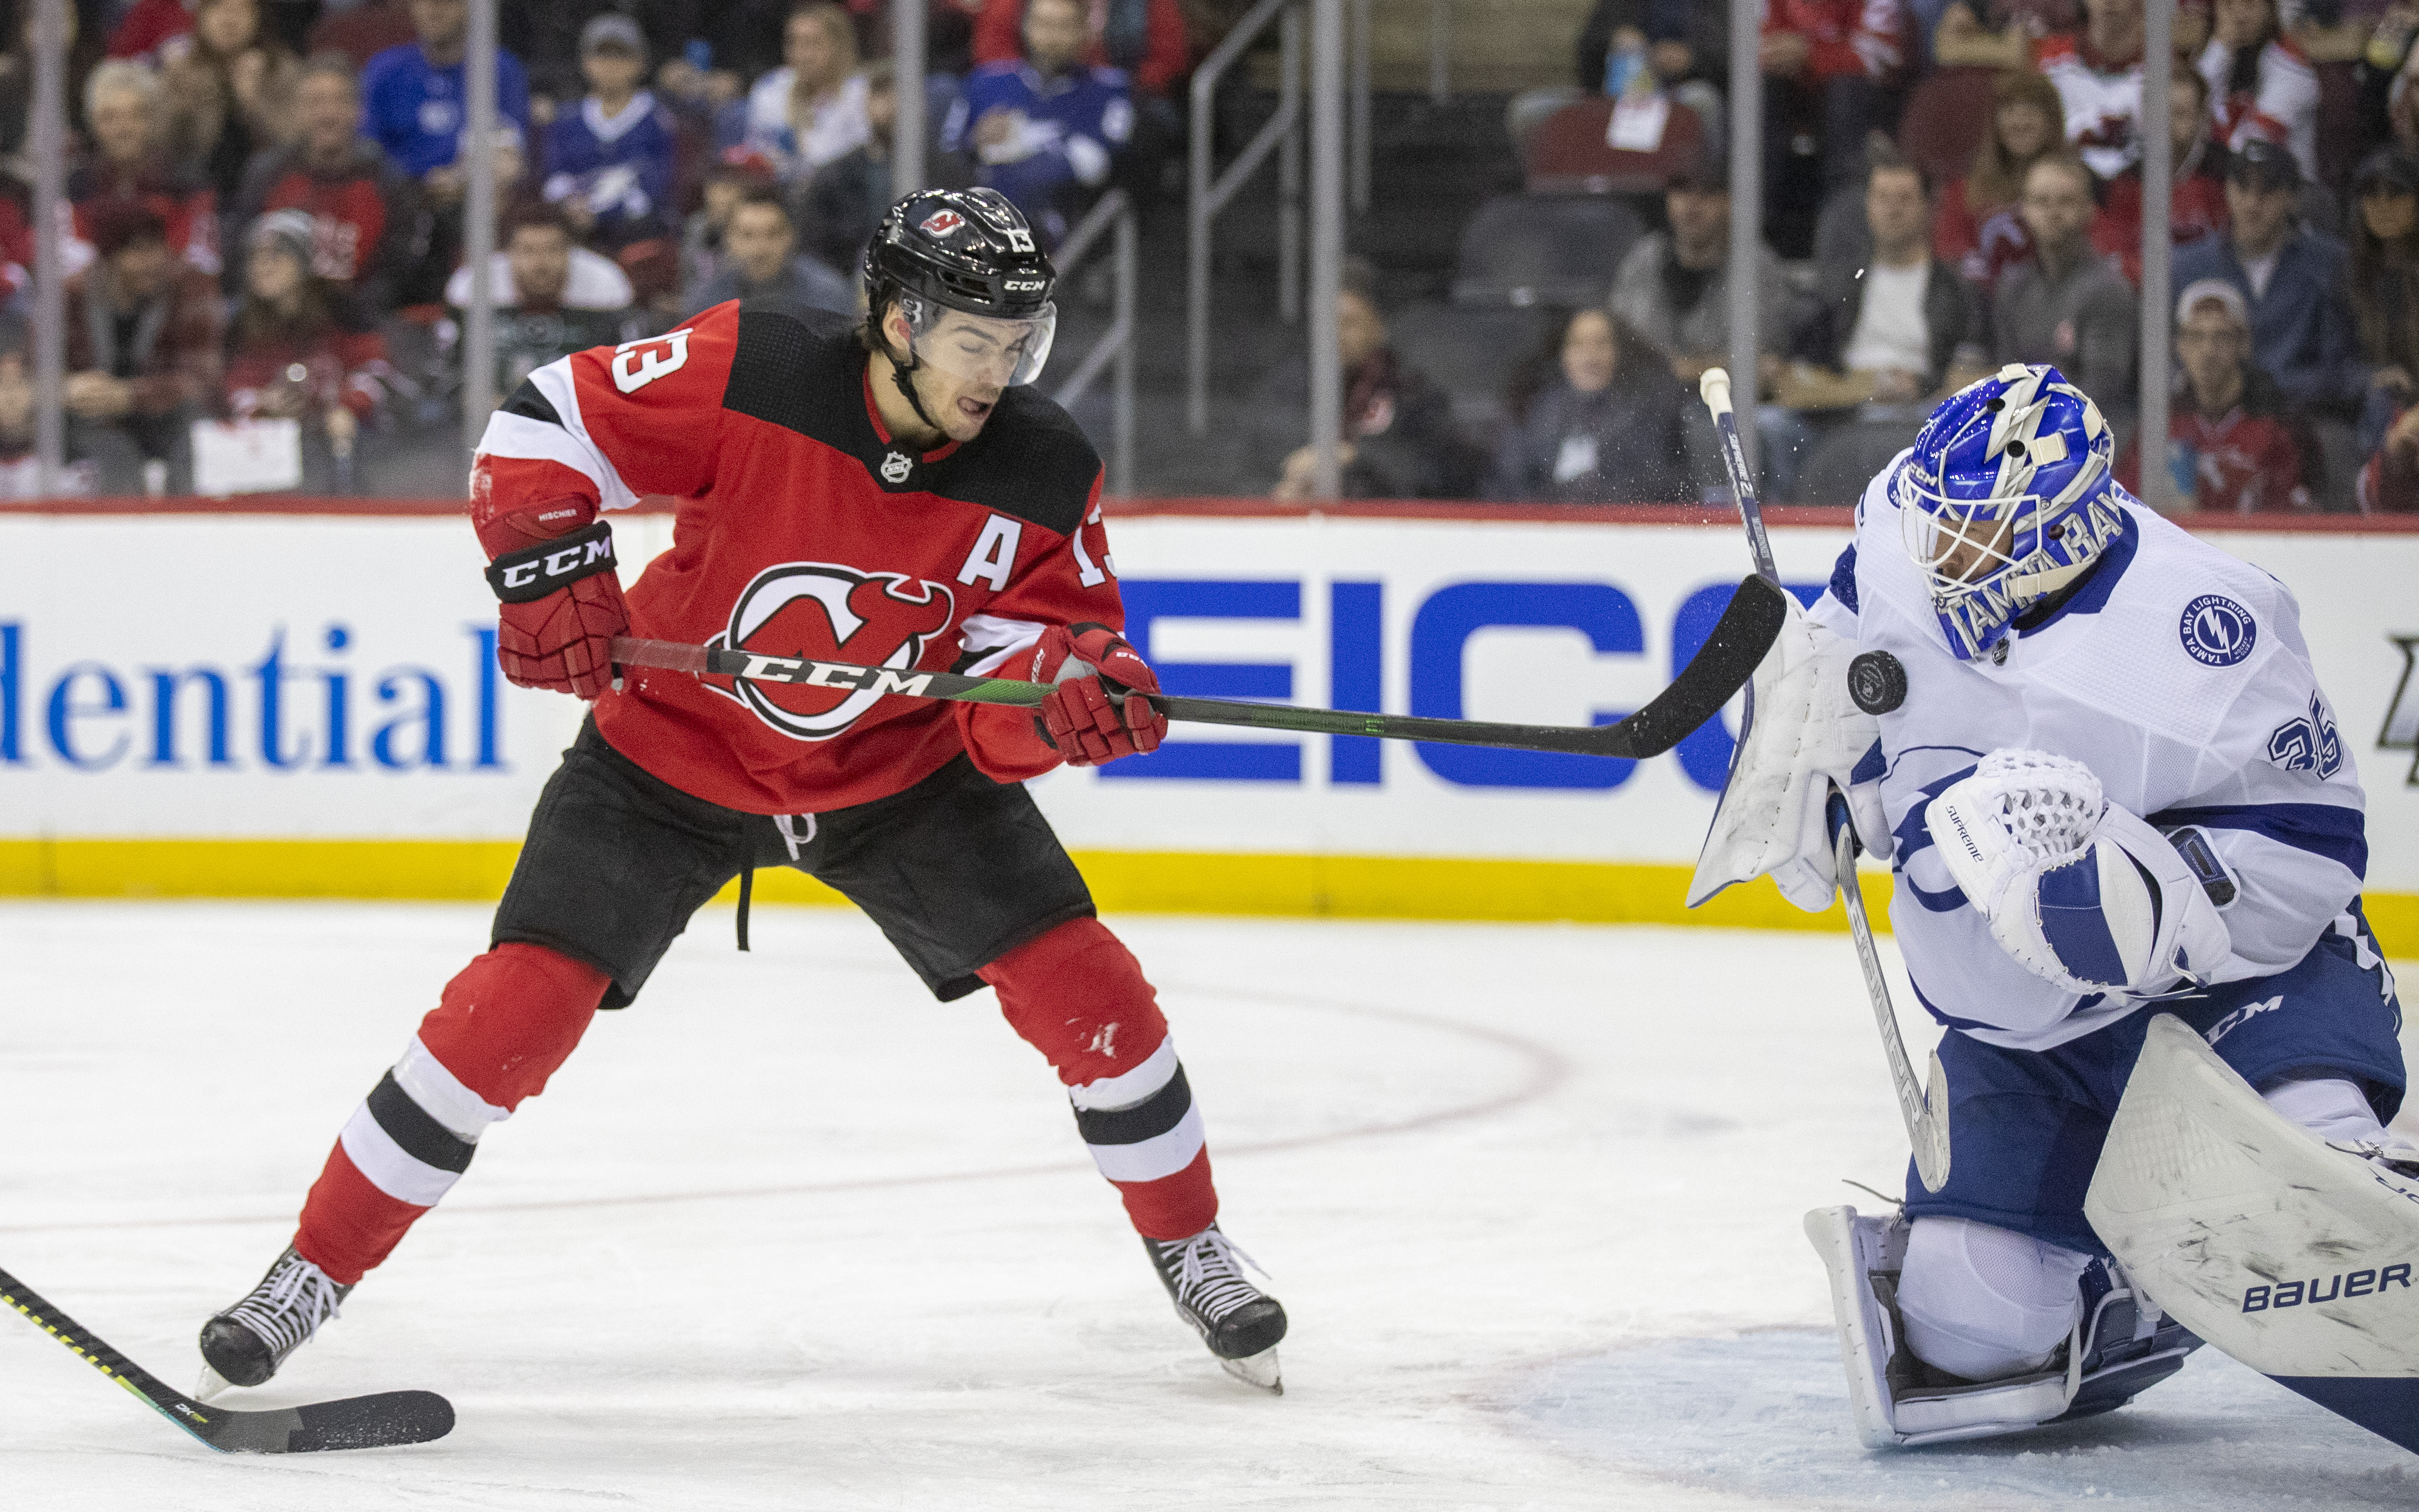 Nico Hischier became the first player - New Jersey Devils